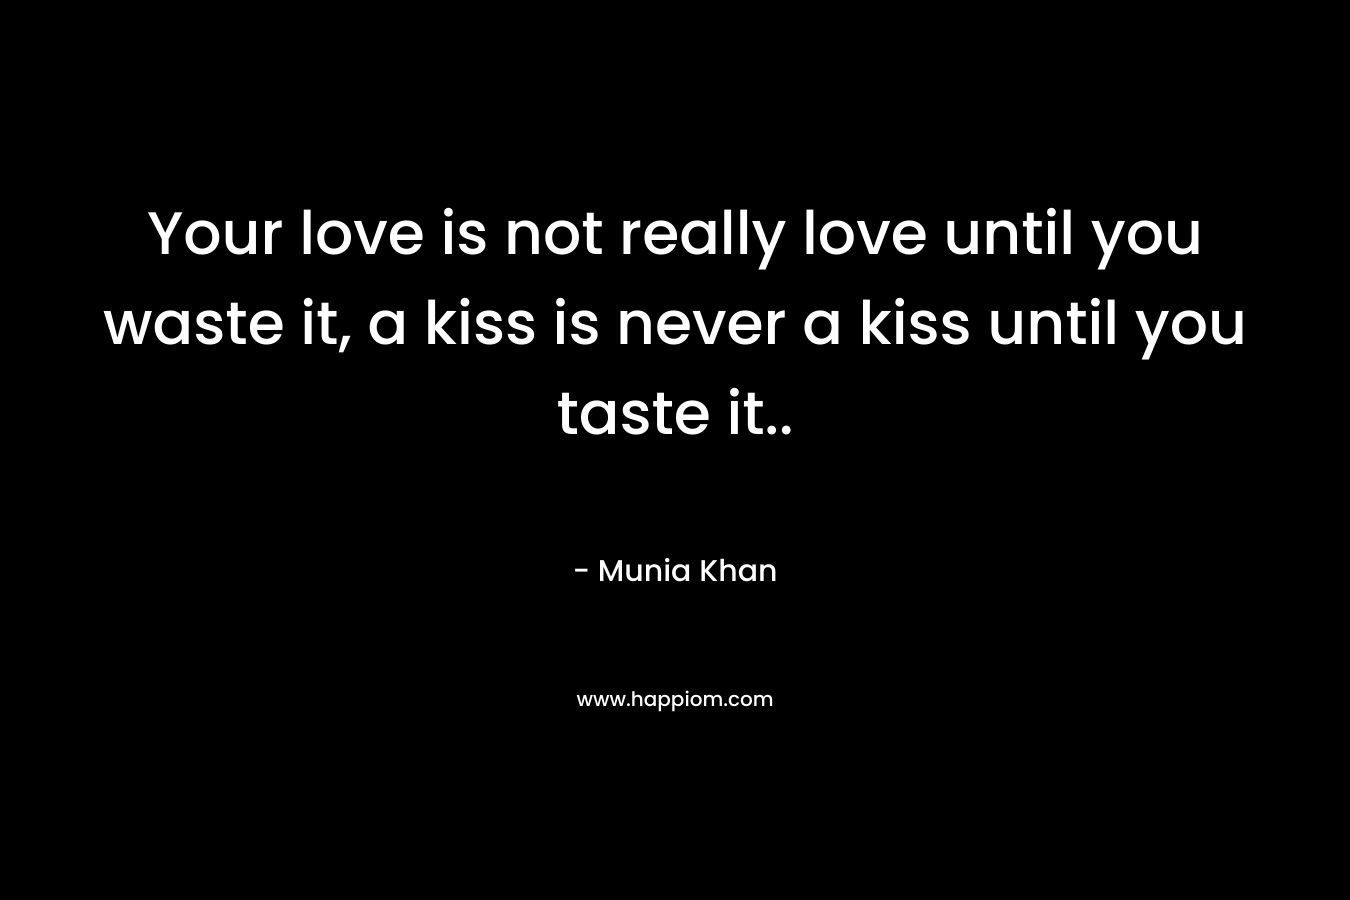 Your love is not really love until you waste it, a kiss is never a kiss until you taste it..